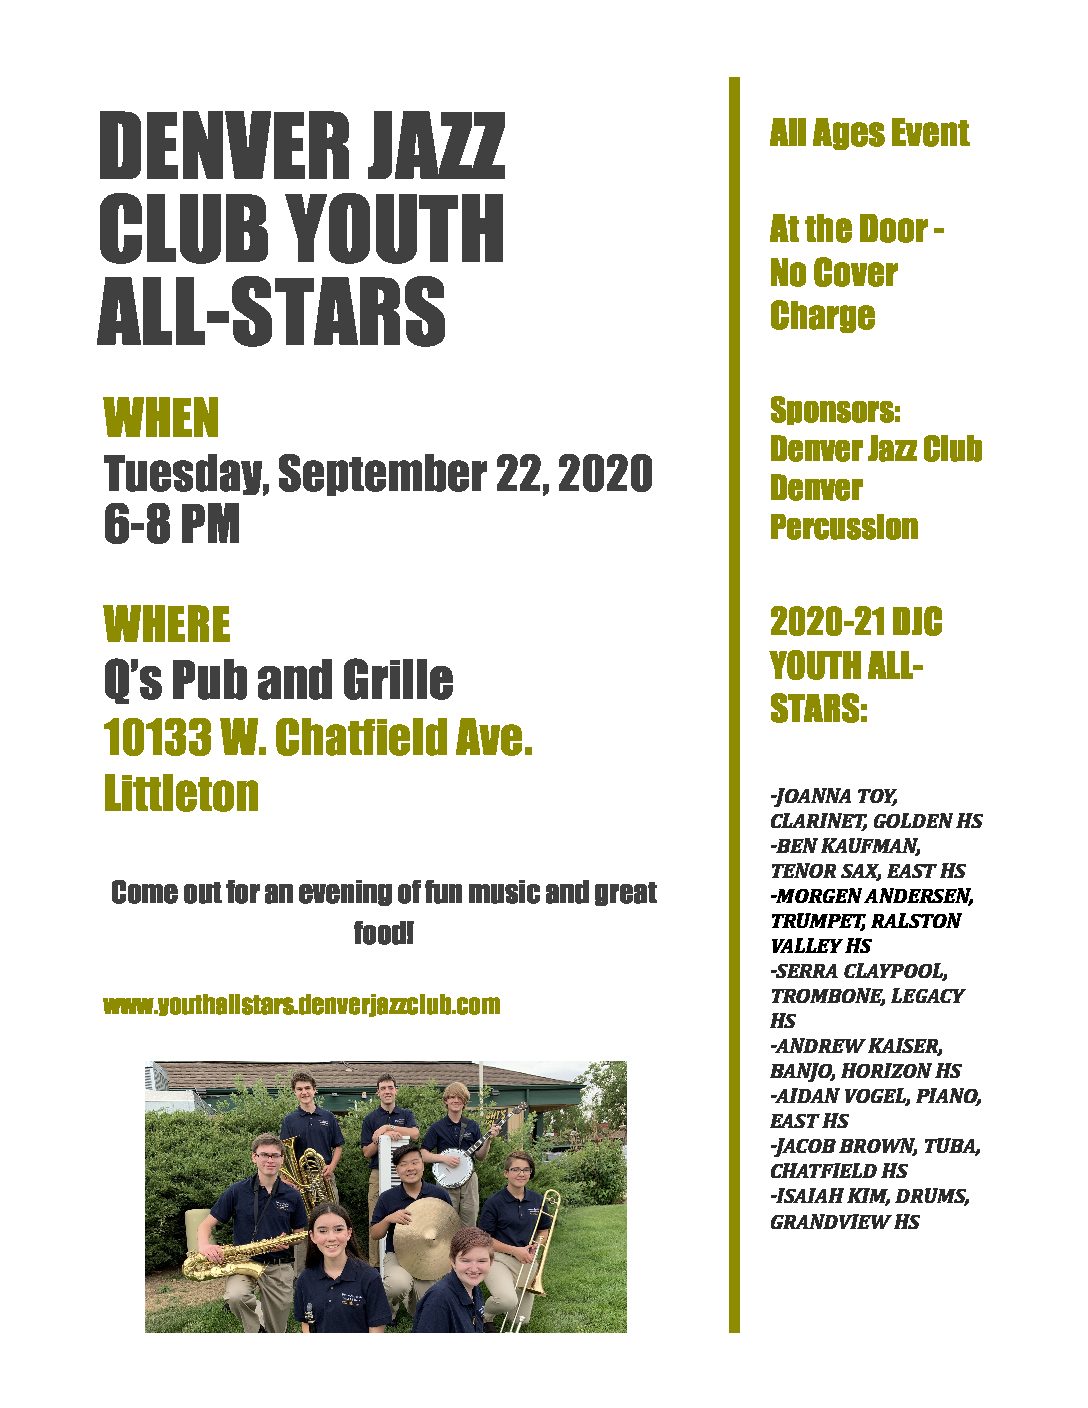 Denver Jazz Club Youth All-Stars to Perform at Q’s Pub and Grille on Tuesday, September 22nd (6-8pm)